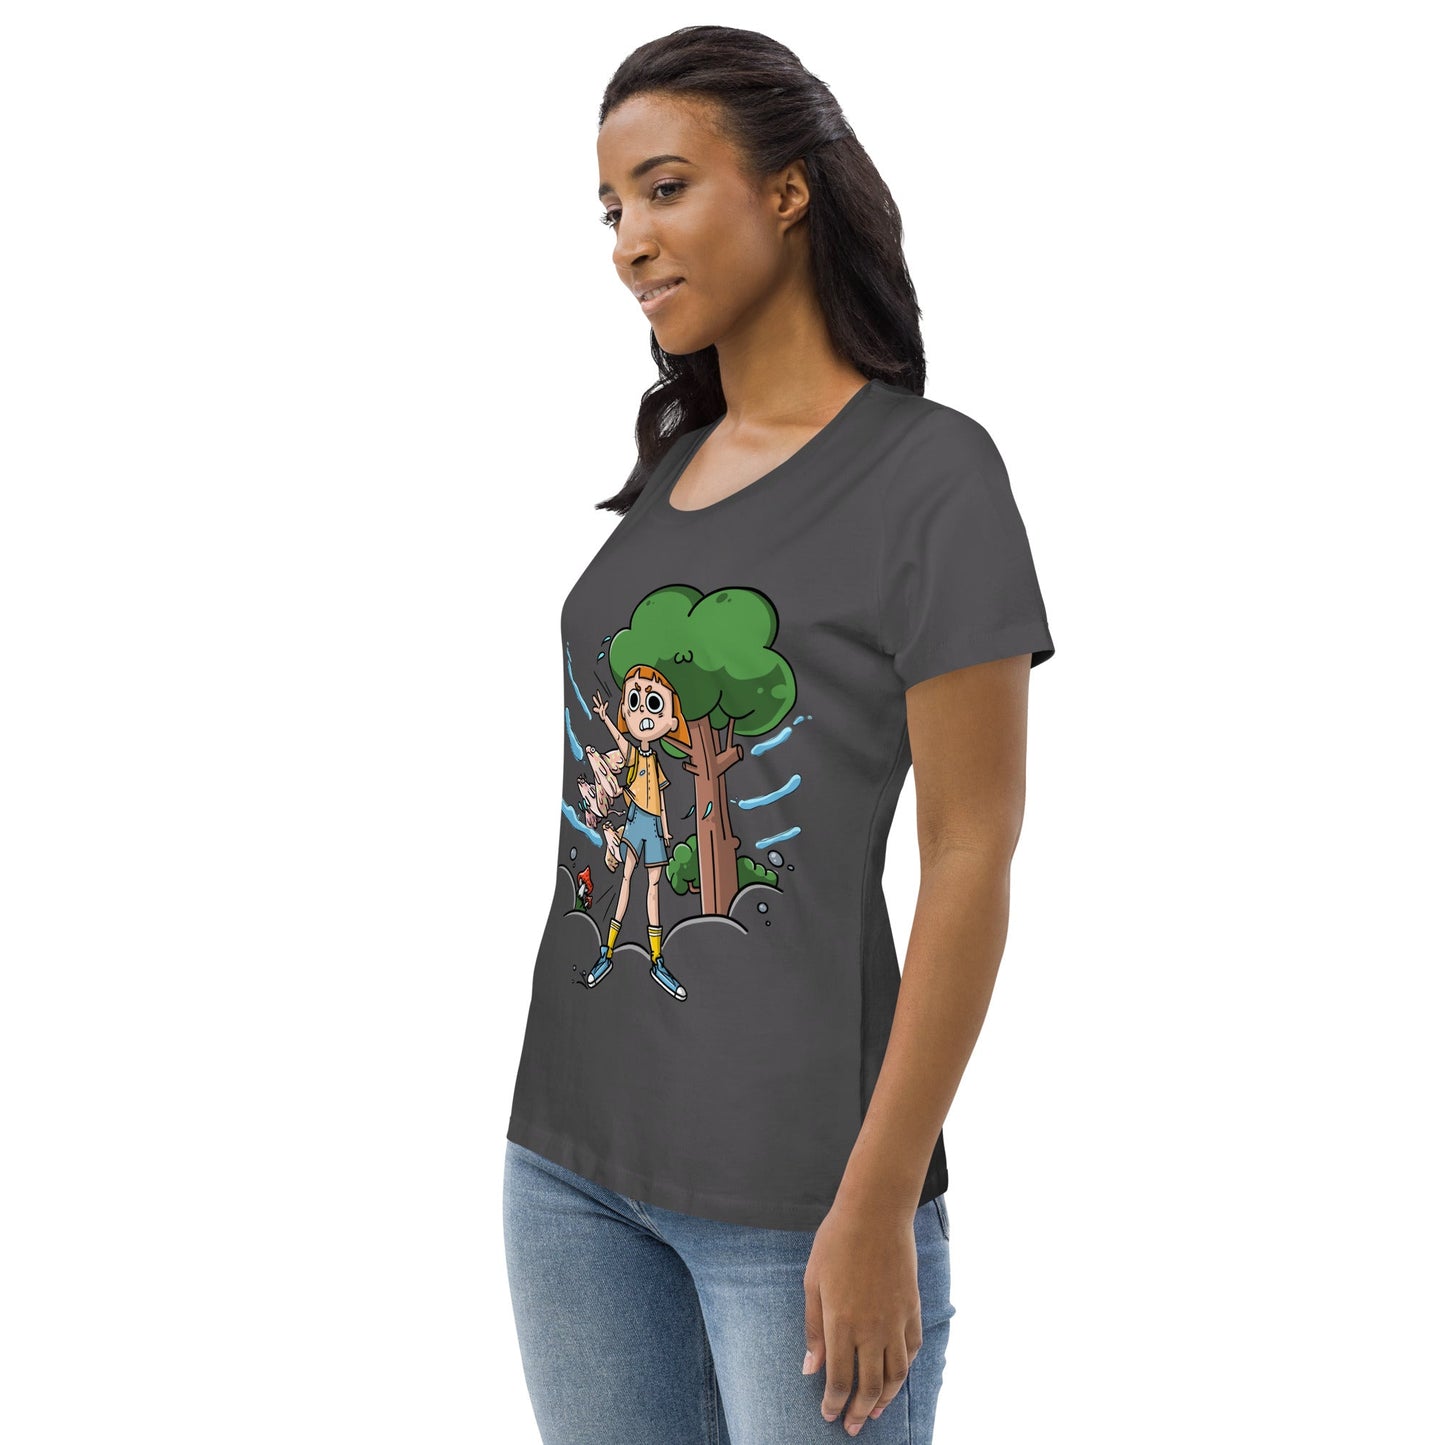 womens-eco-tshirt-zombie-time-anthracite